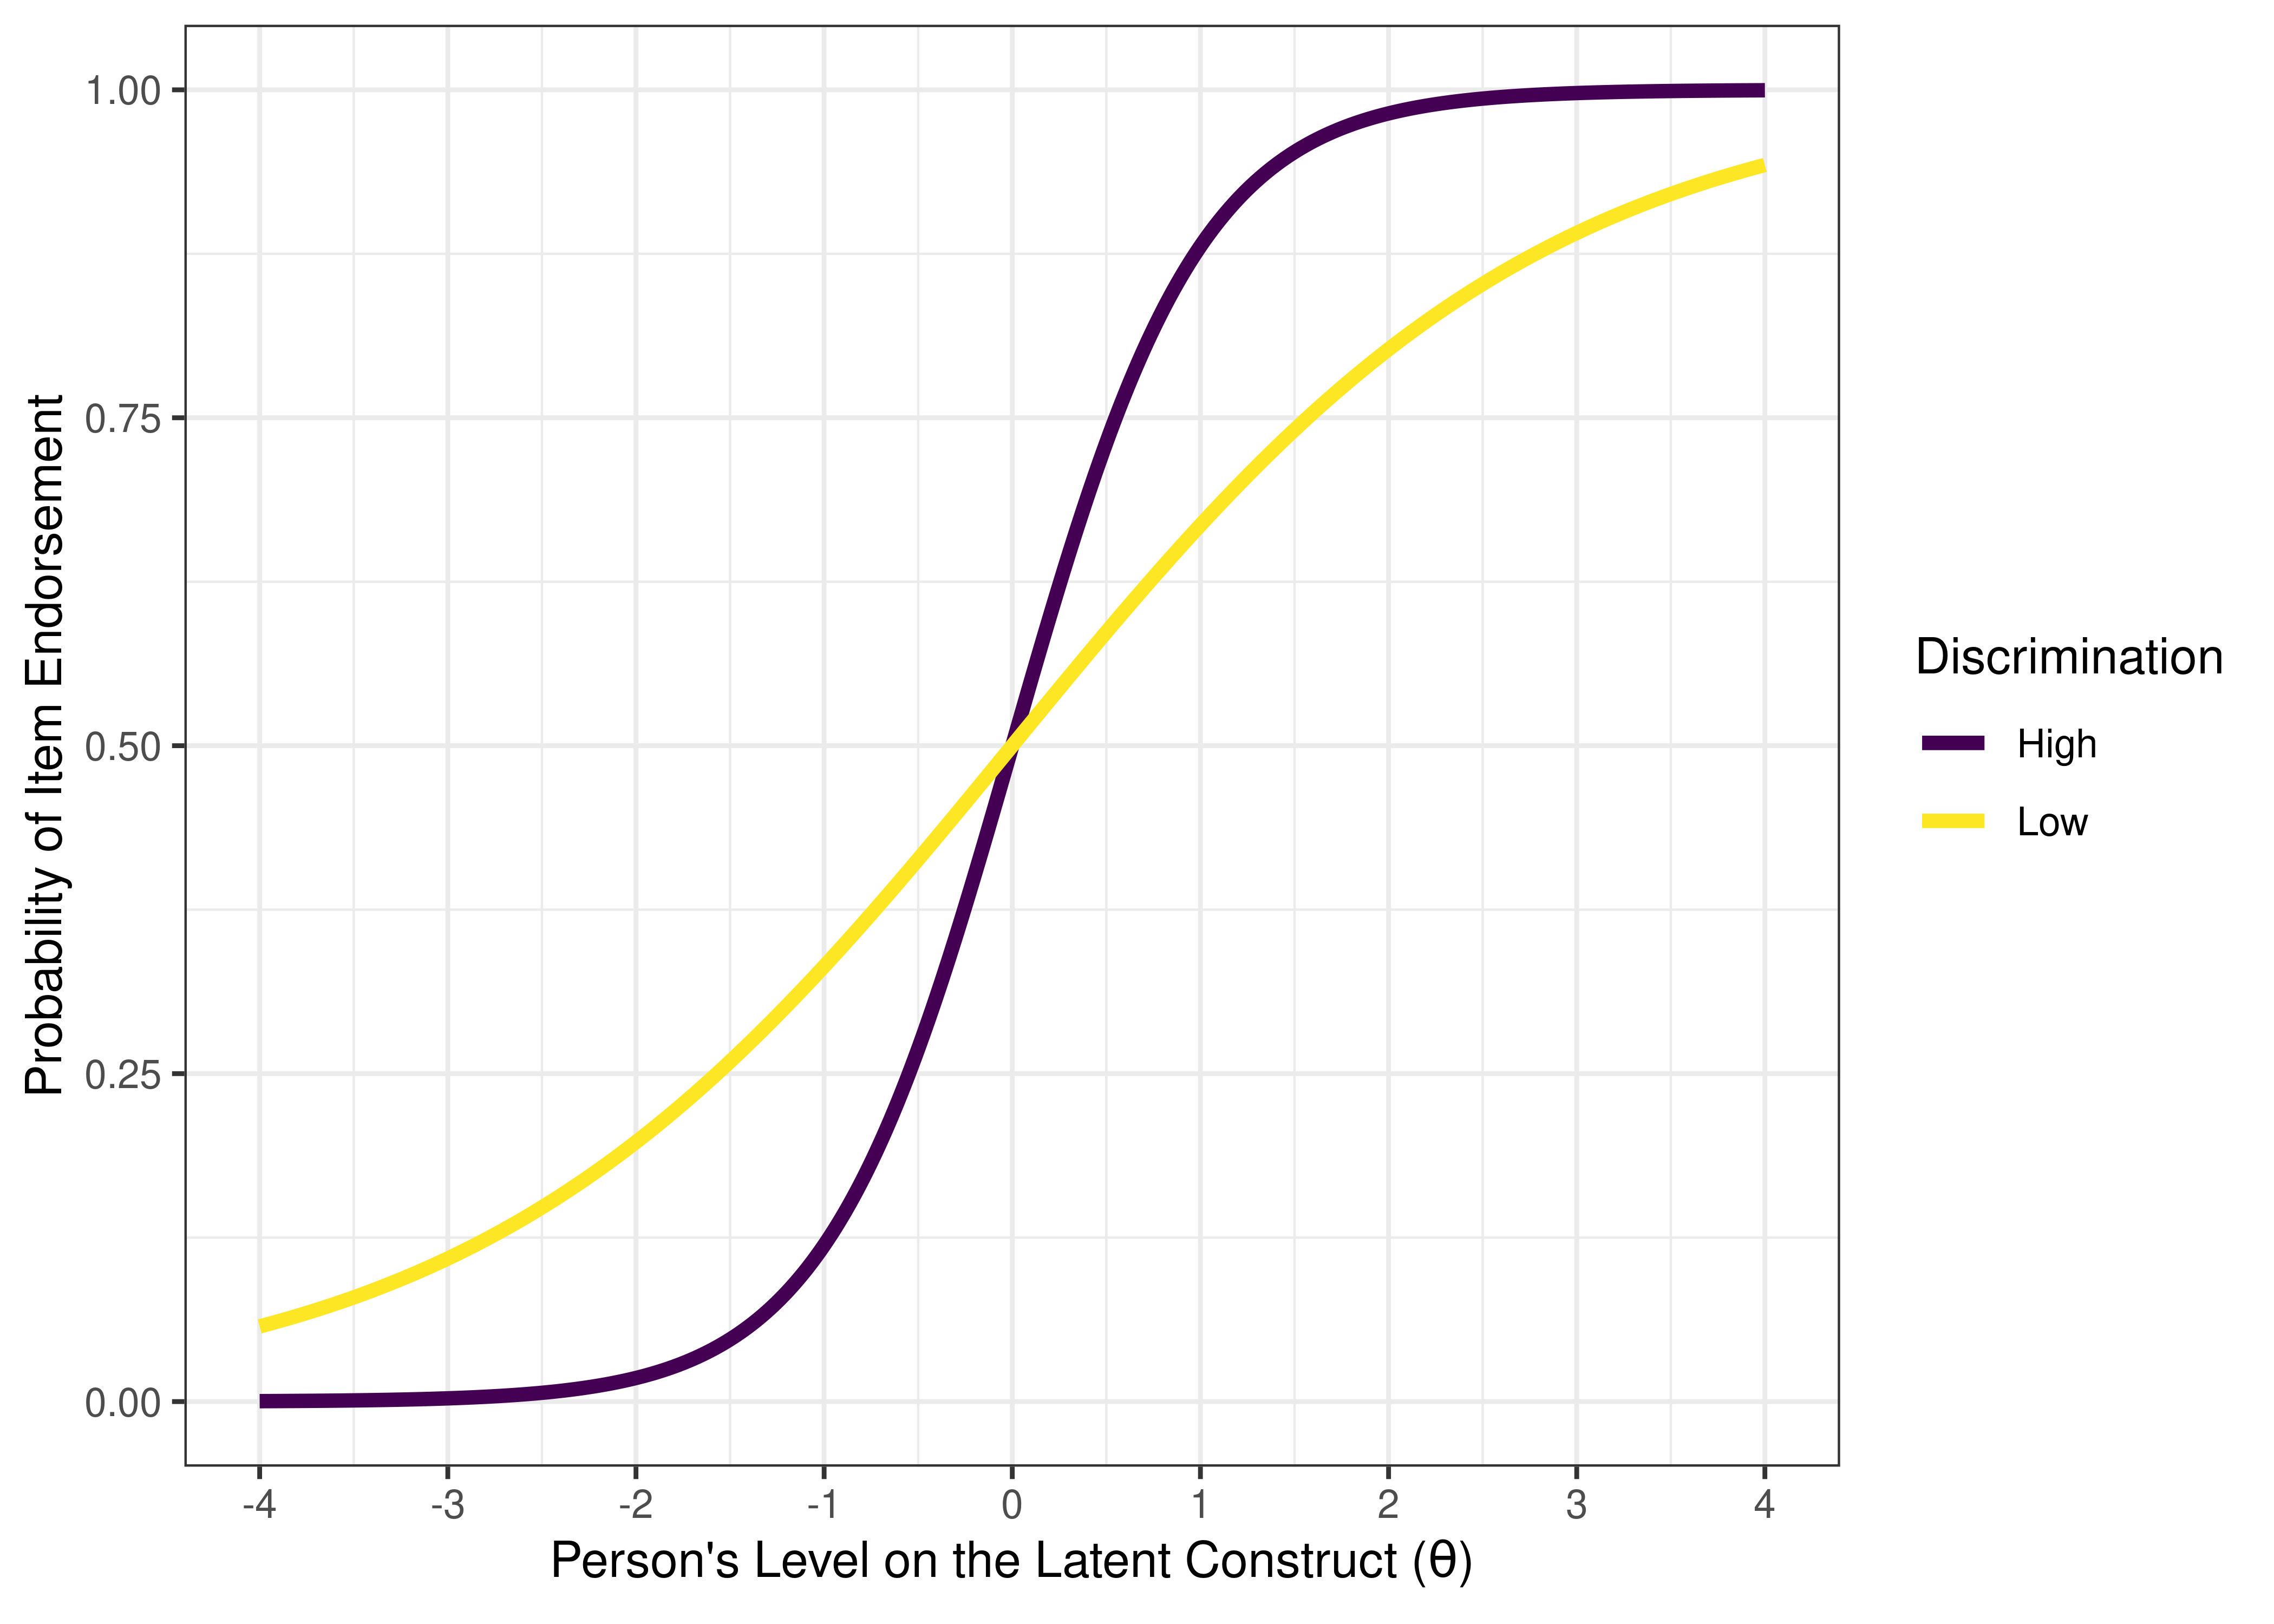 Item Characteristic Curves of an Item With Low Discrimination Versus High Discrimination. The discrimination of an item is the slope of the line at its inflection point.